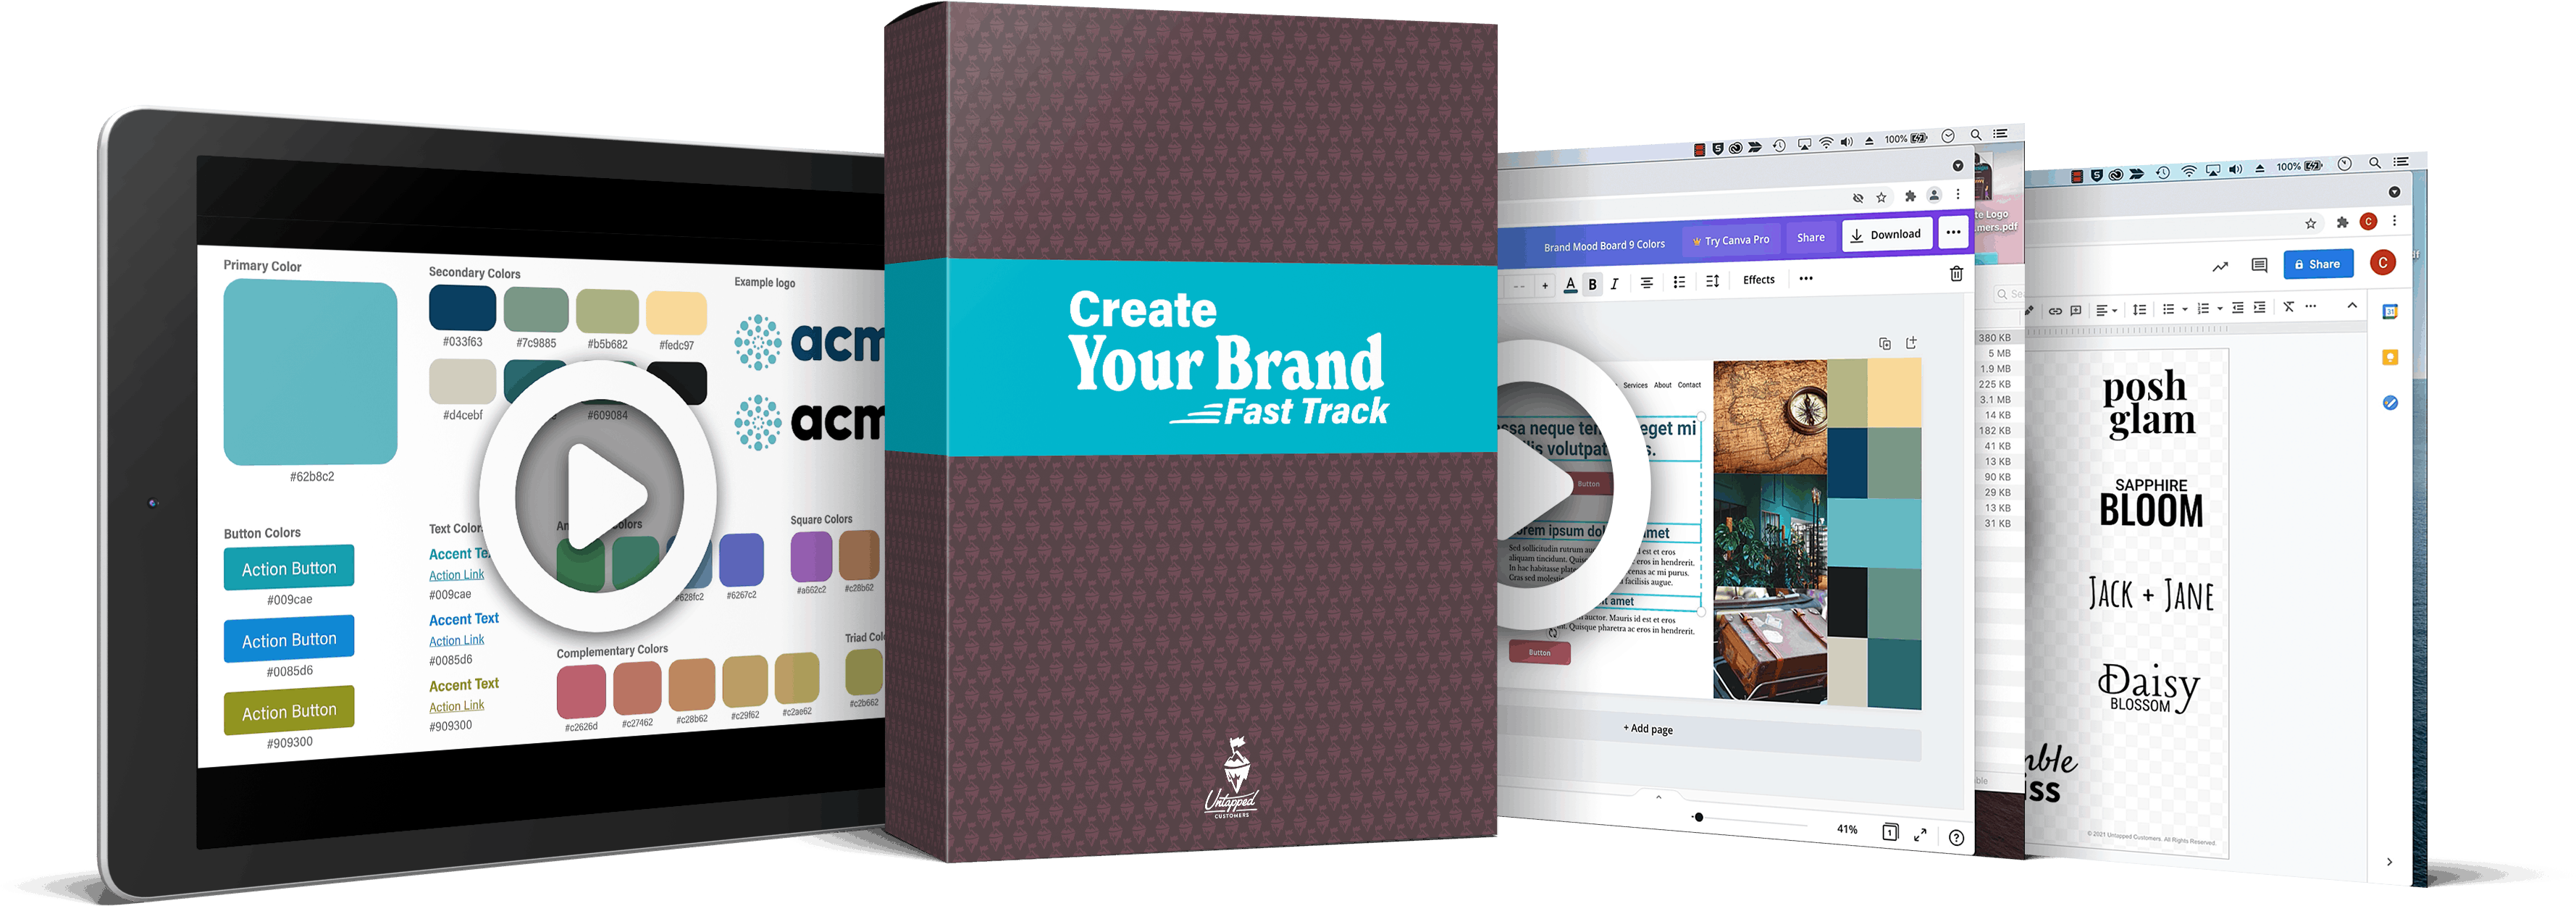 create your brand fast track mockup